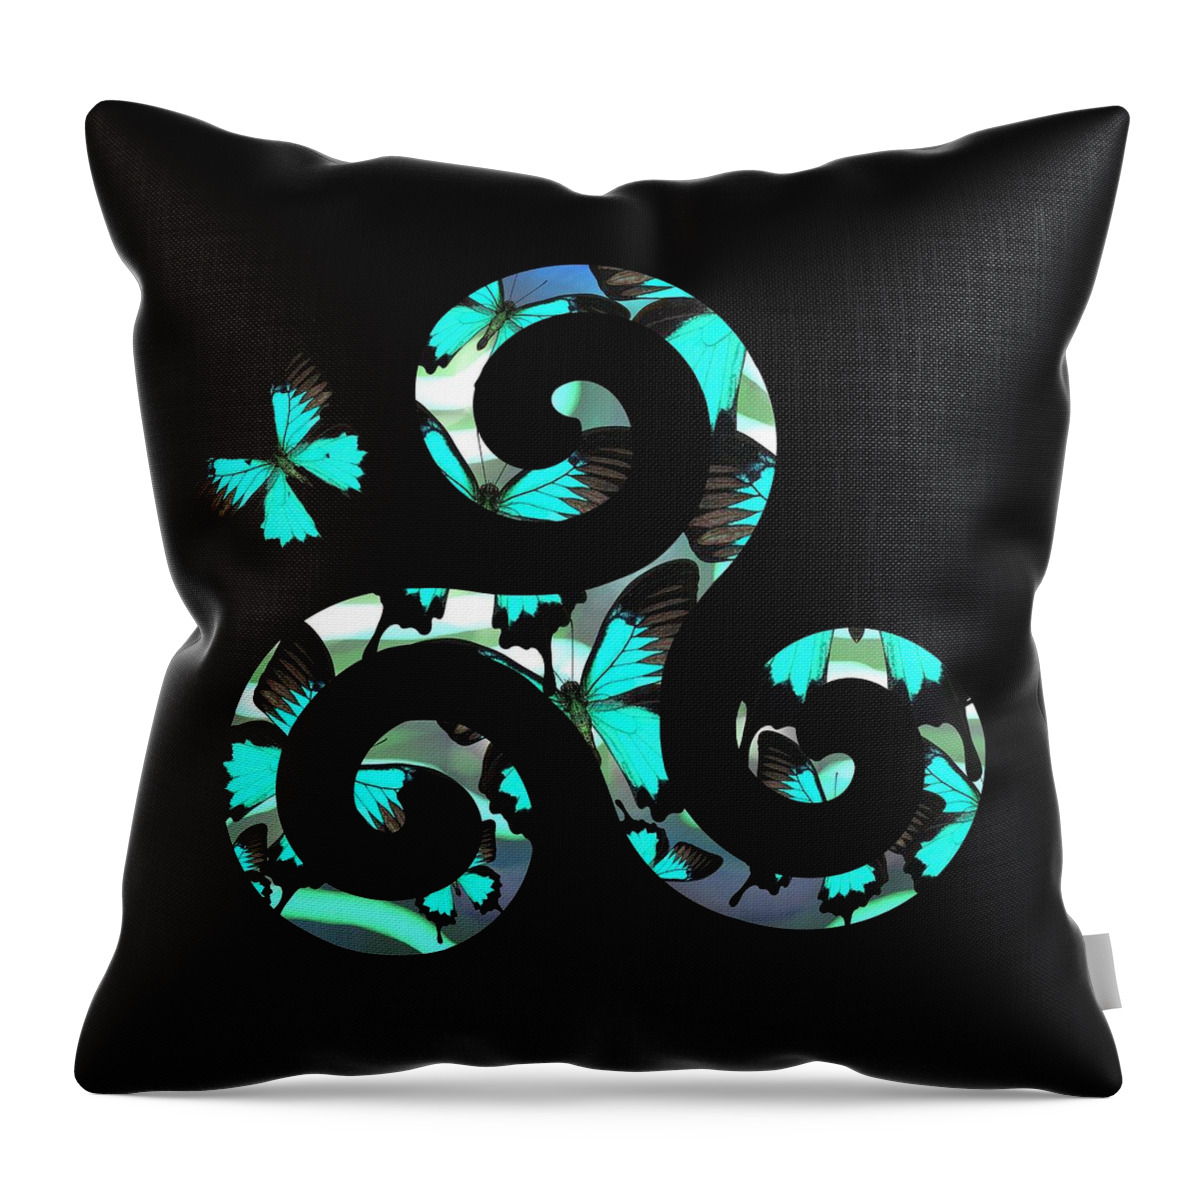 Celtic Spiral Throw Pillow featuring the digital art Celtic Spiral 3 by Joan Stratton